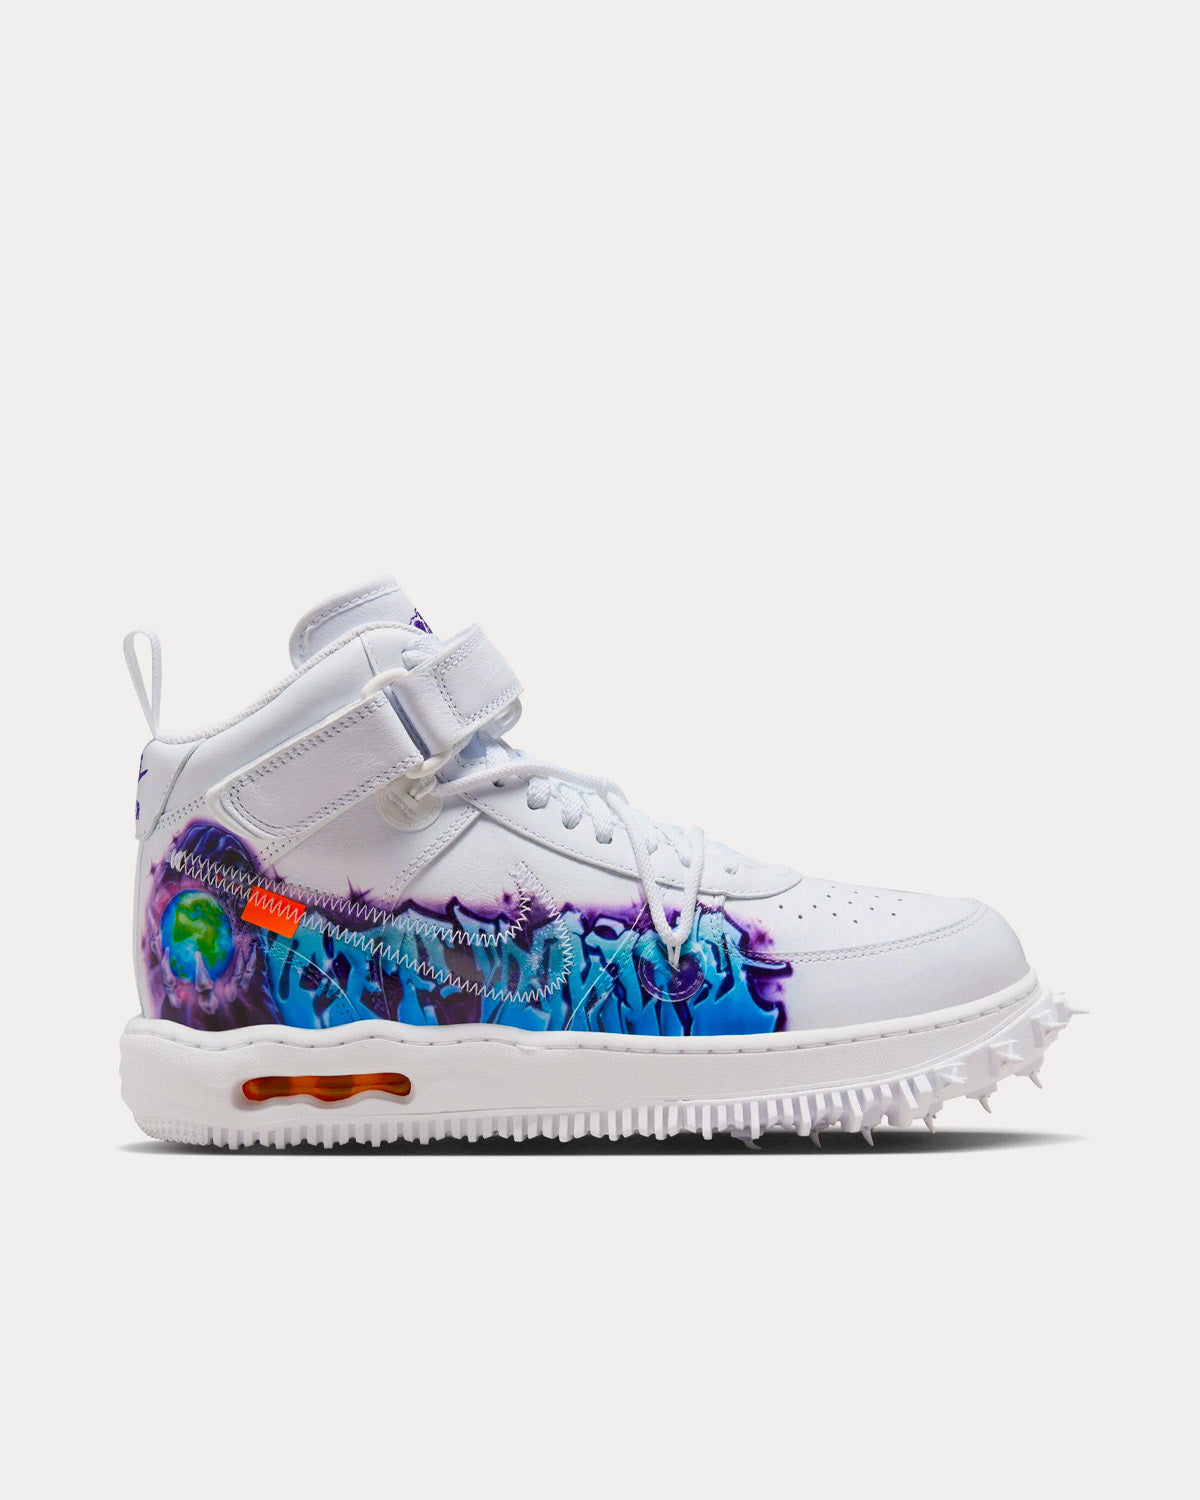 Nike x Off-White - Air Force 1 Mid Graffiti White Mid Top Sneakers